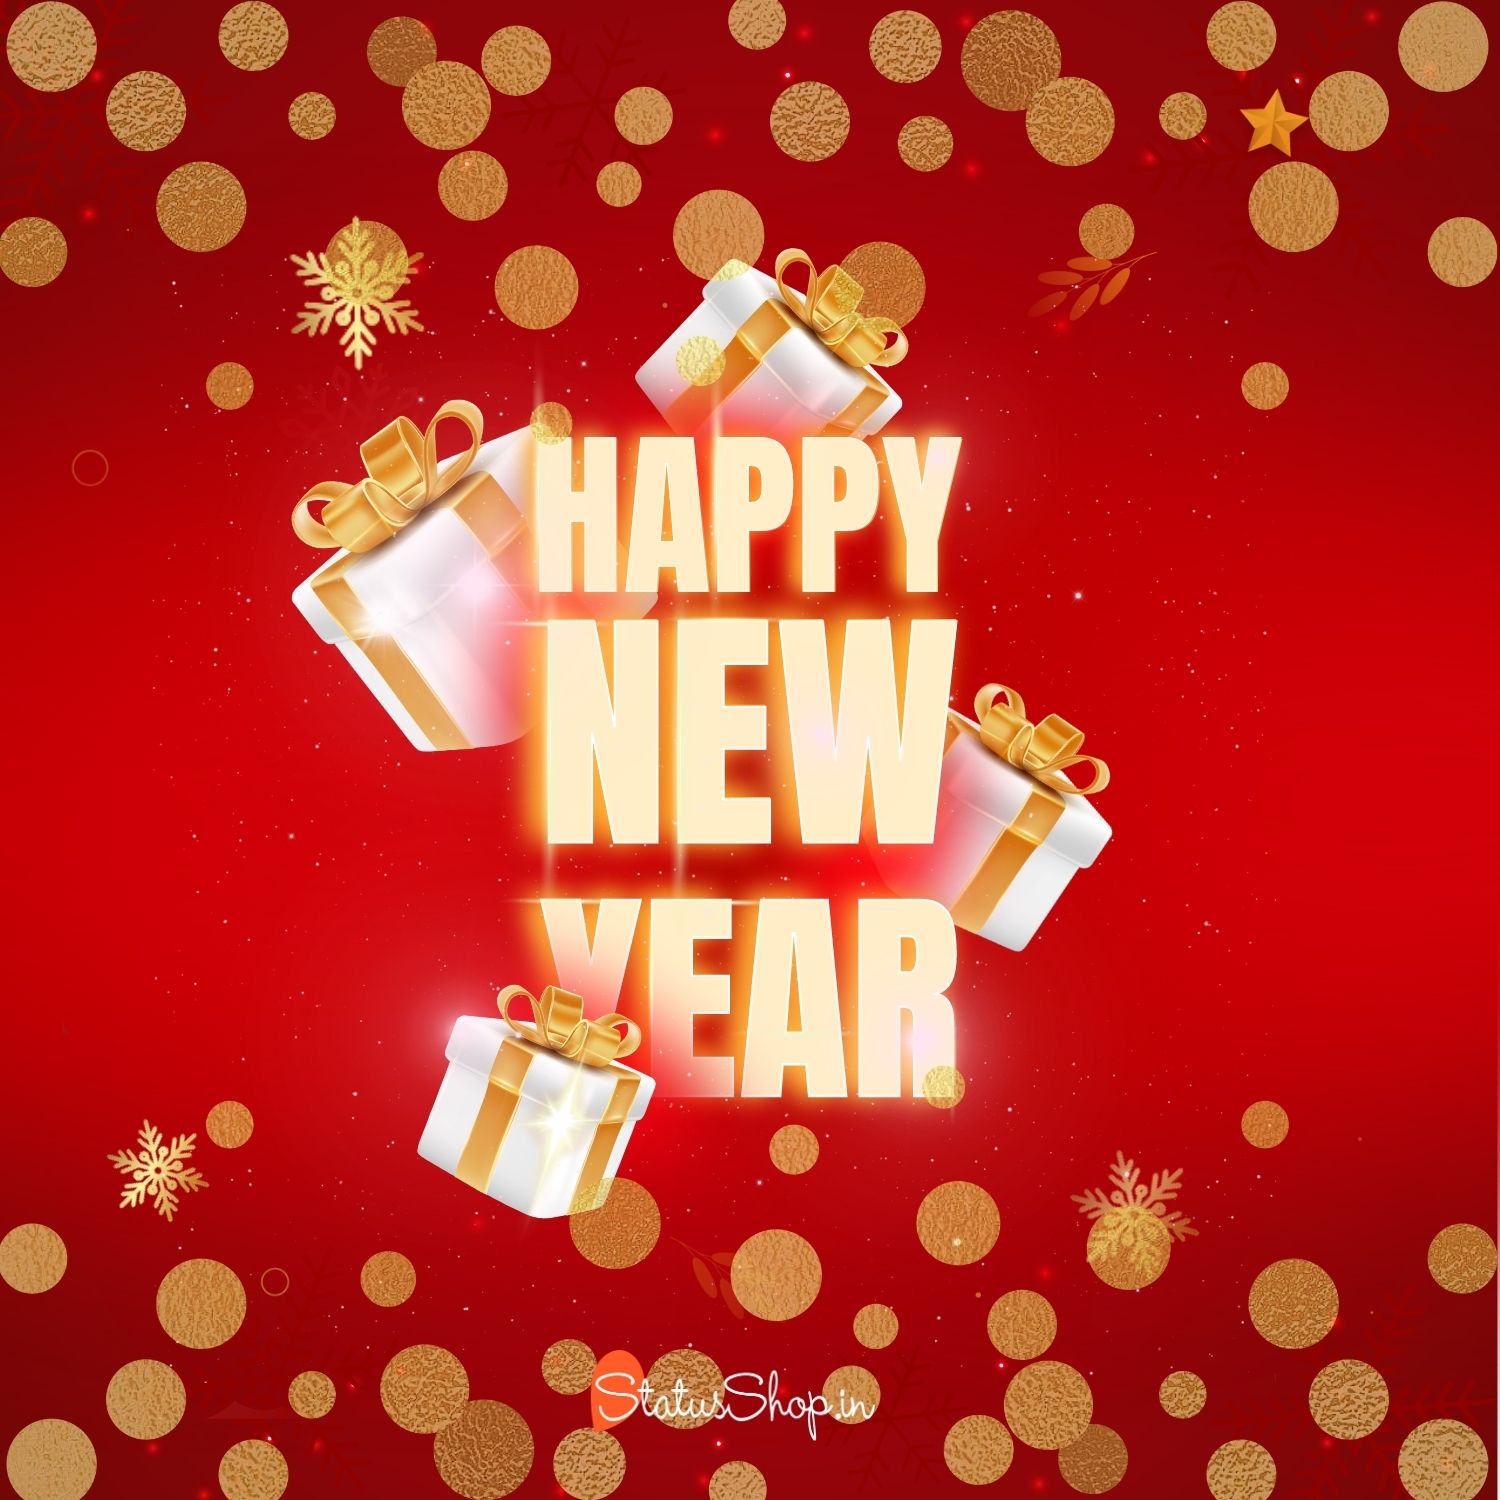 Images-Happy-New-Year